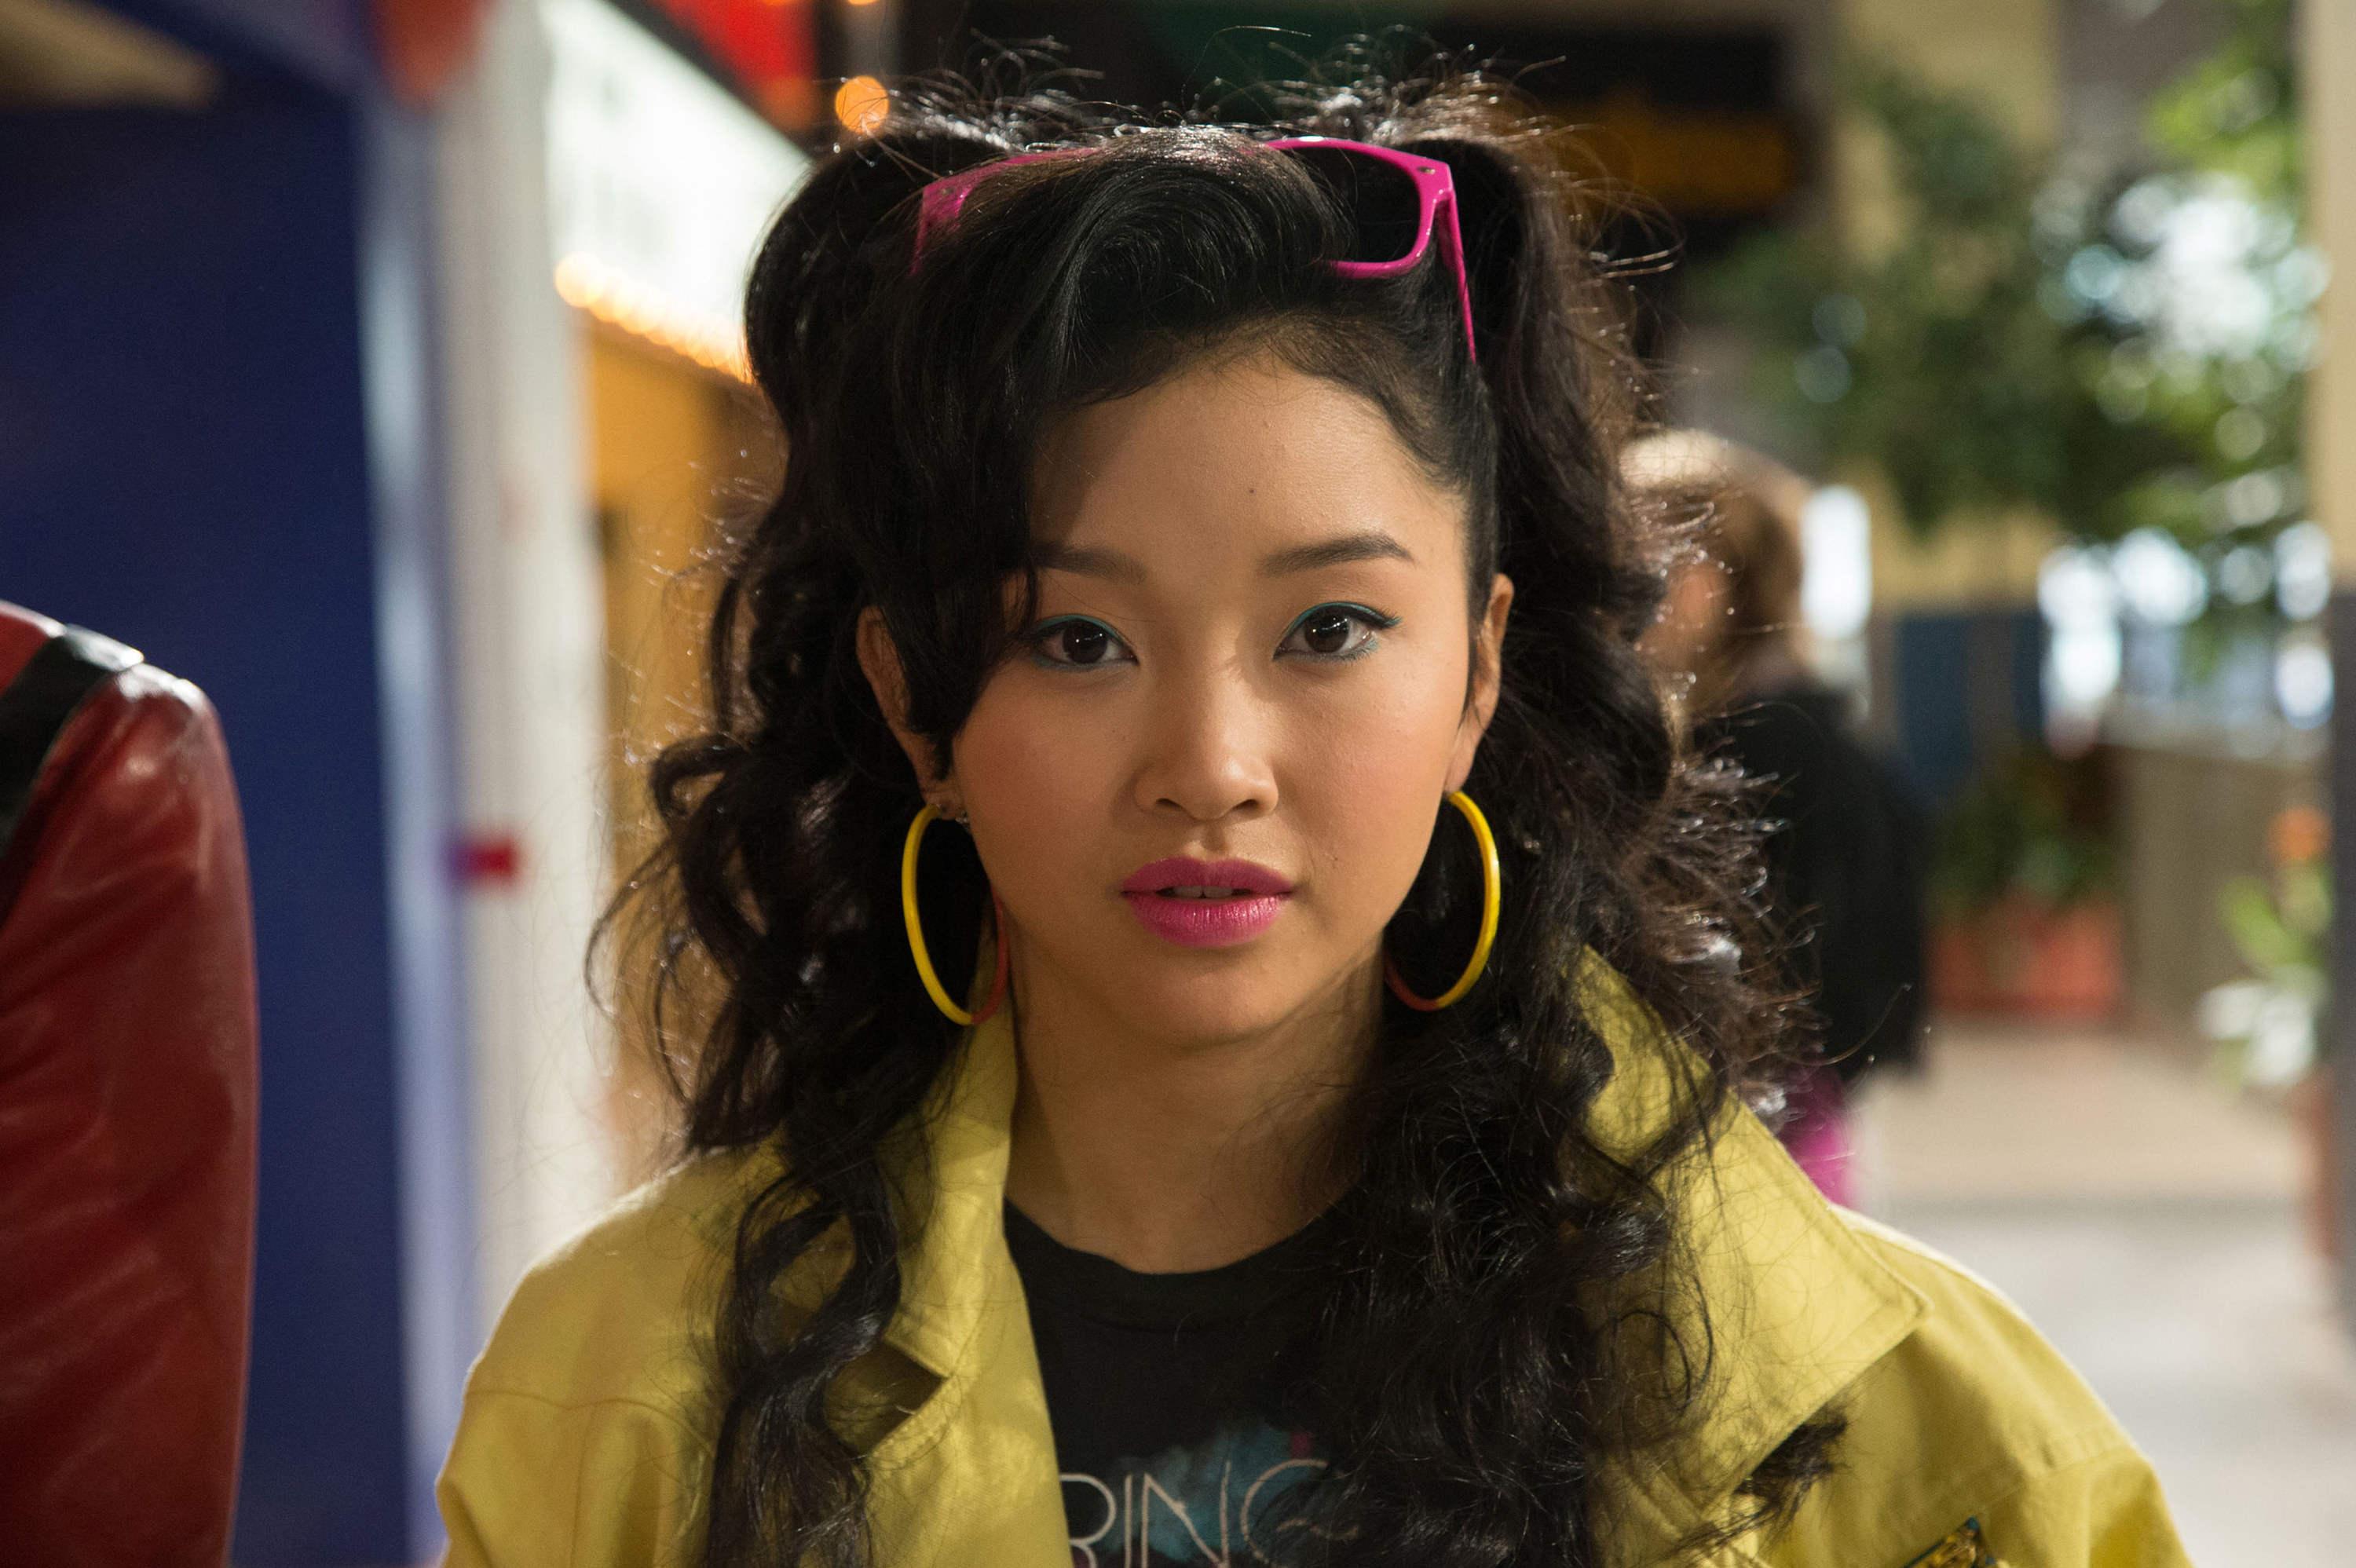 with her curly  hair in pigtails dressed in a bright jacket, sunglasses, and hoop earrings, Jubilee stares into the camera